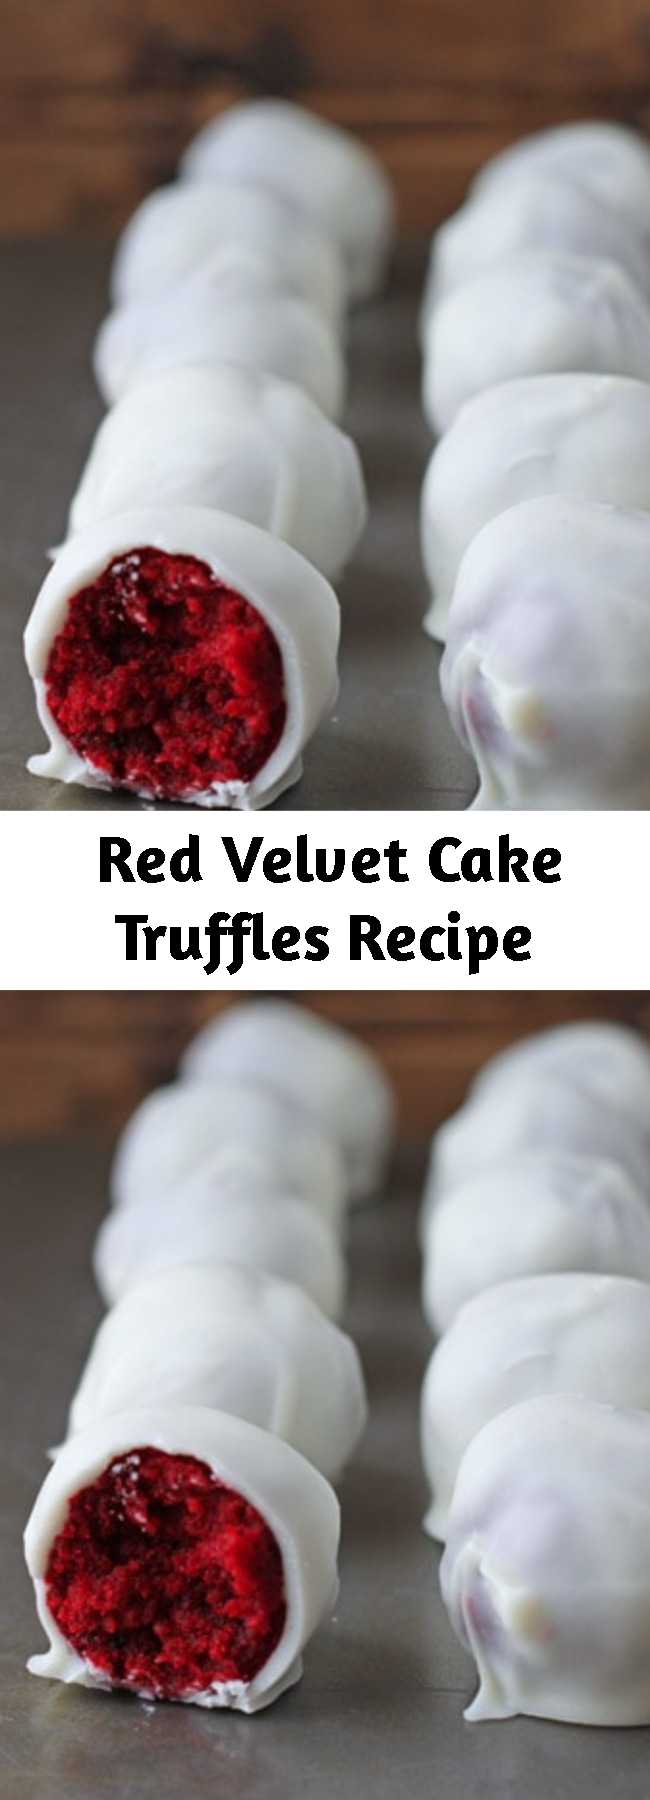 Red Velvet Cake Truffles Recipe - These red velvet cake truffles are one of my favorite holiday food gifts to make! Red Velvet truffles with red velvet cake and cream cheese frosting in the filling, plus a white chocolate coating.